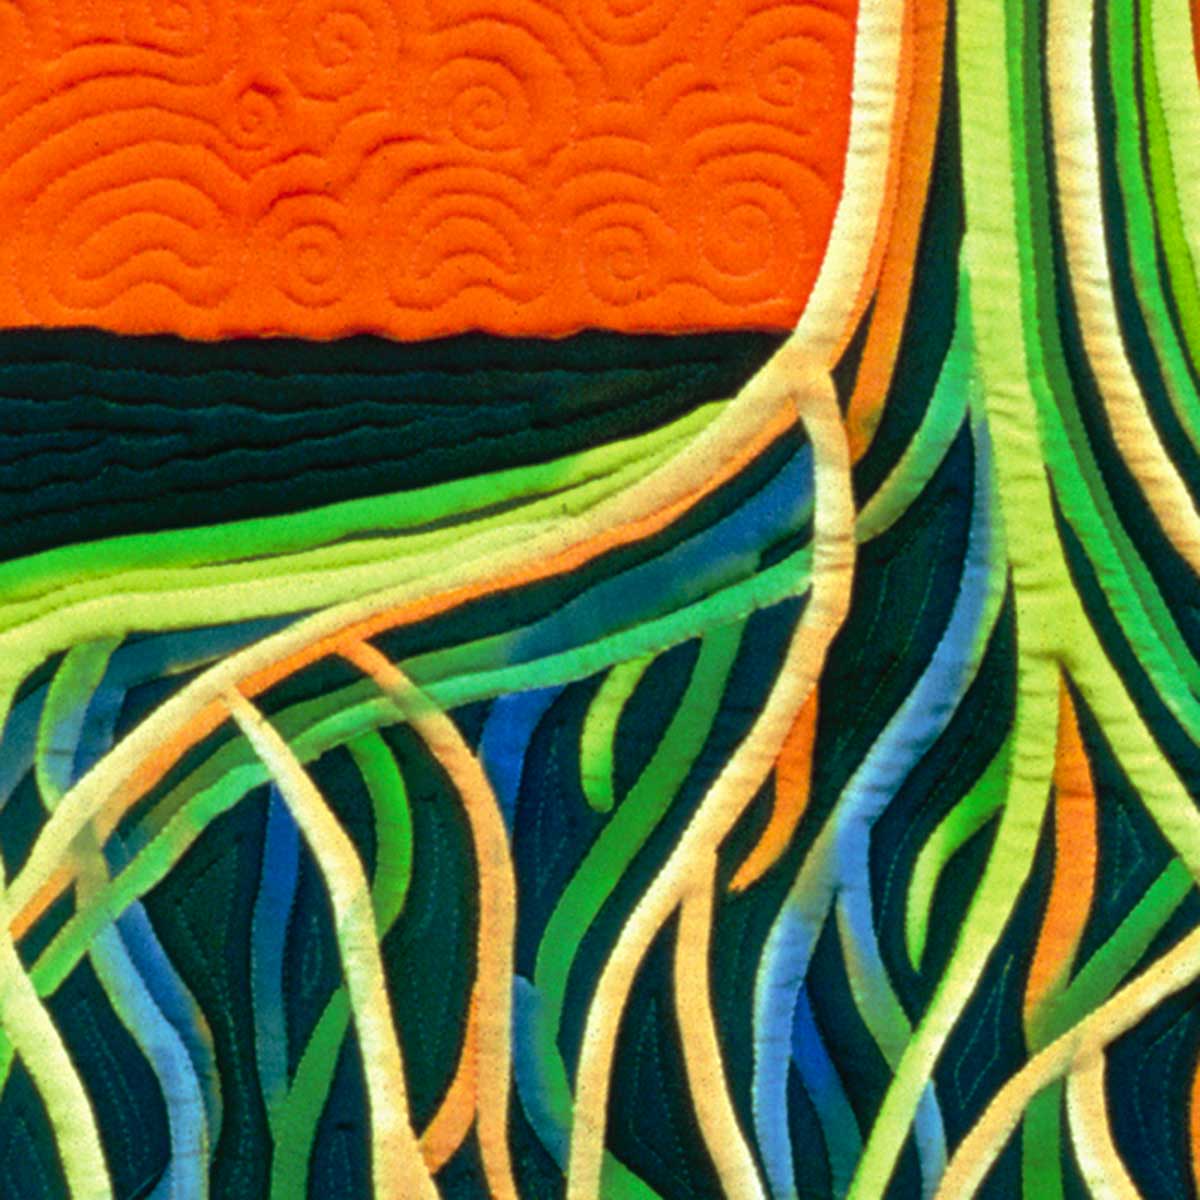 Detail image of Roots ©2003 Linda Gass